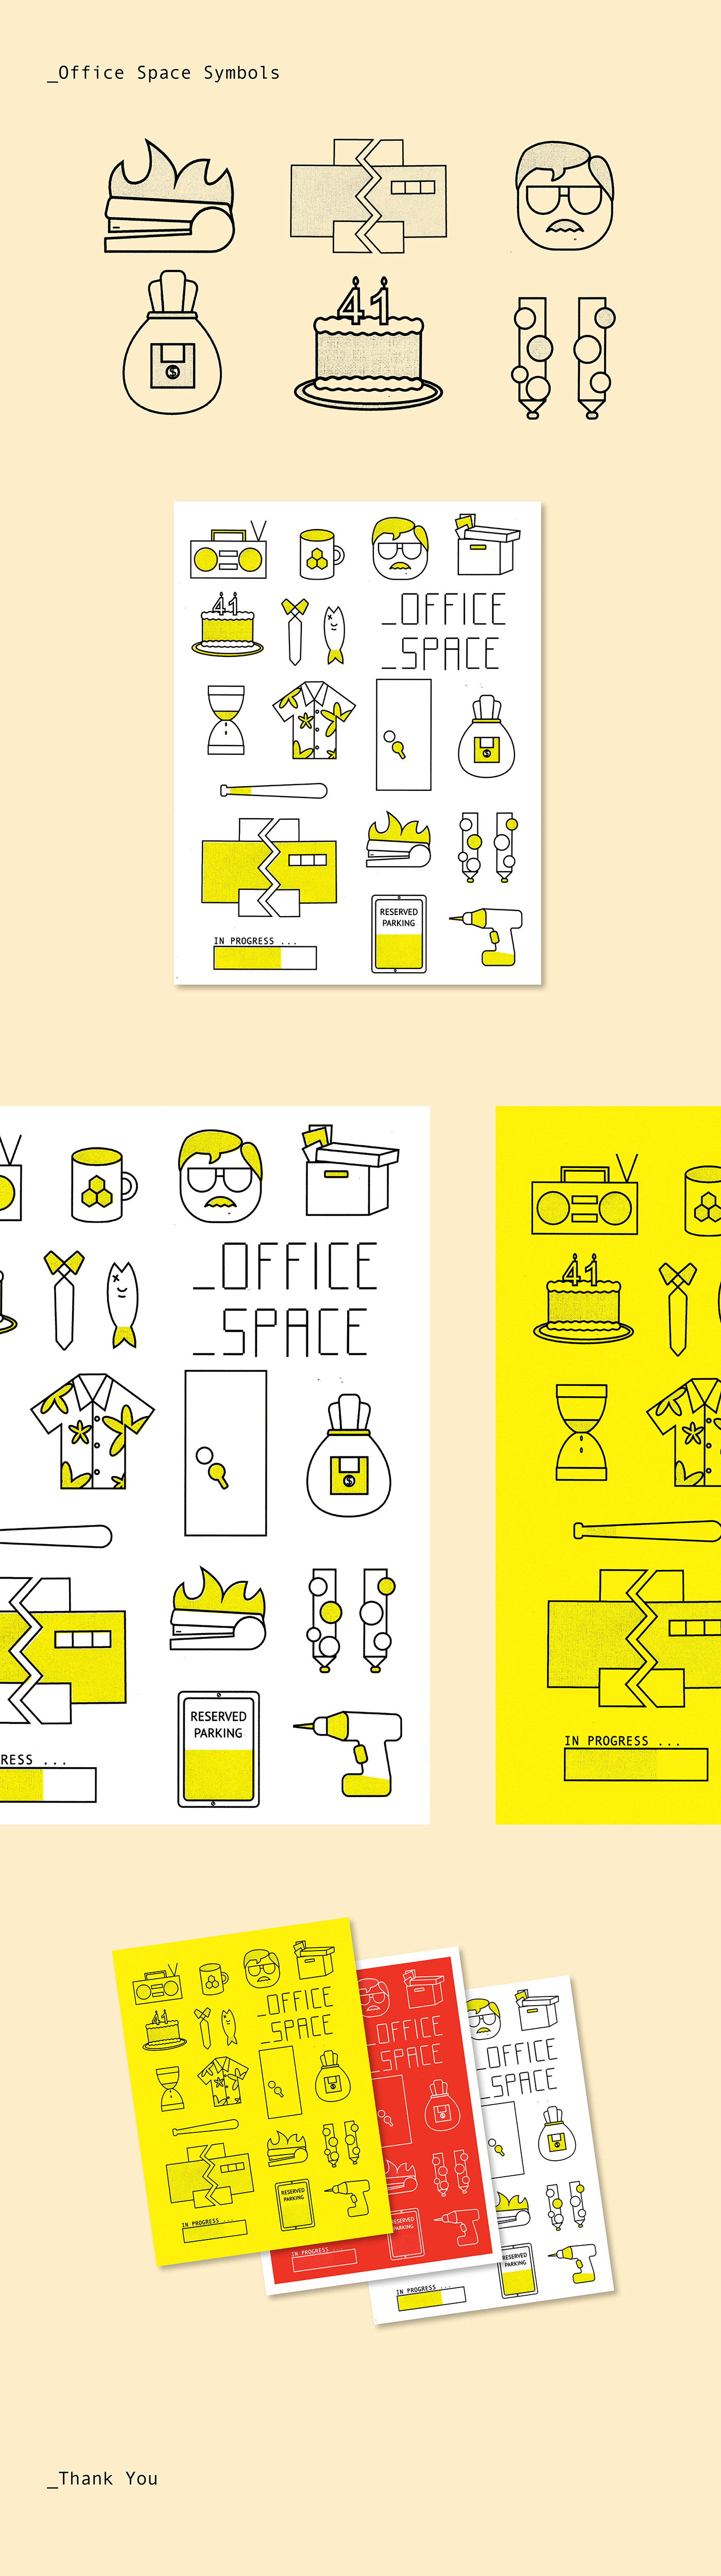 Office Space poster film poster symbols icons